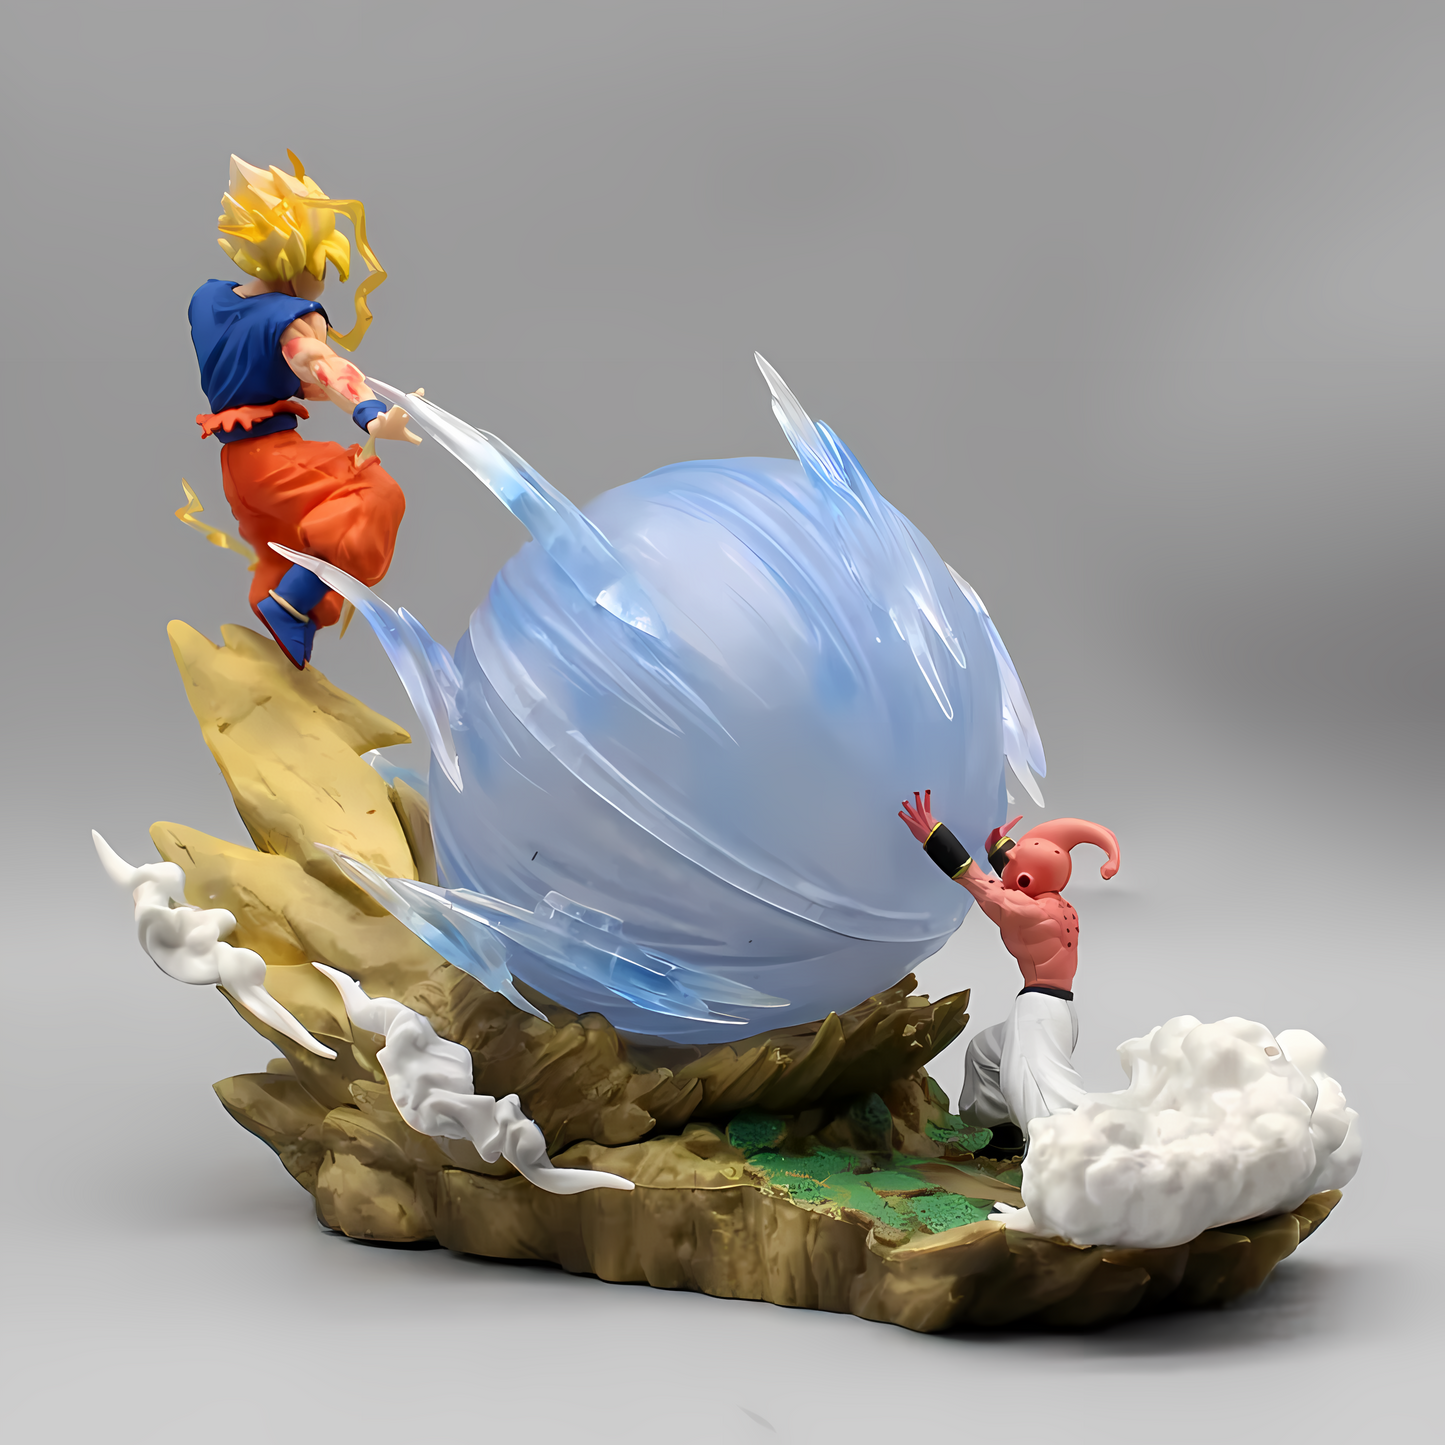 Action figure of Goku evading an energy attack by Majin Buu, captured from a side angle, highlighting the dynamic motion and energy impact.